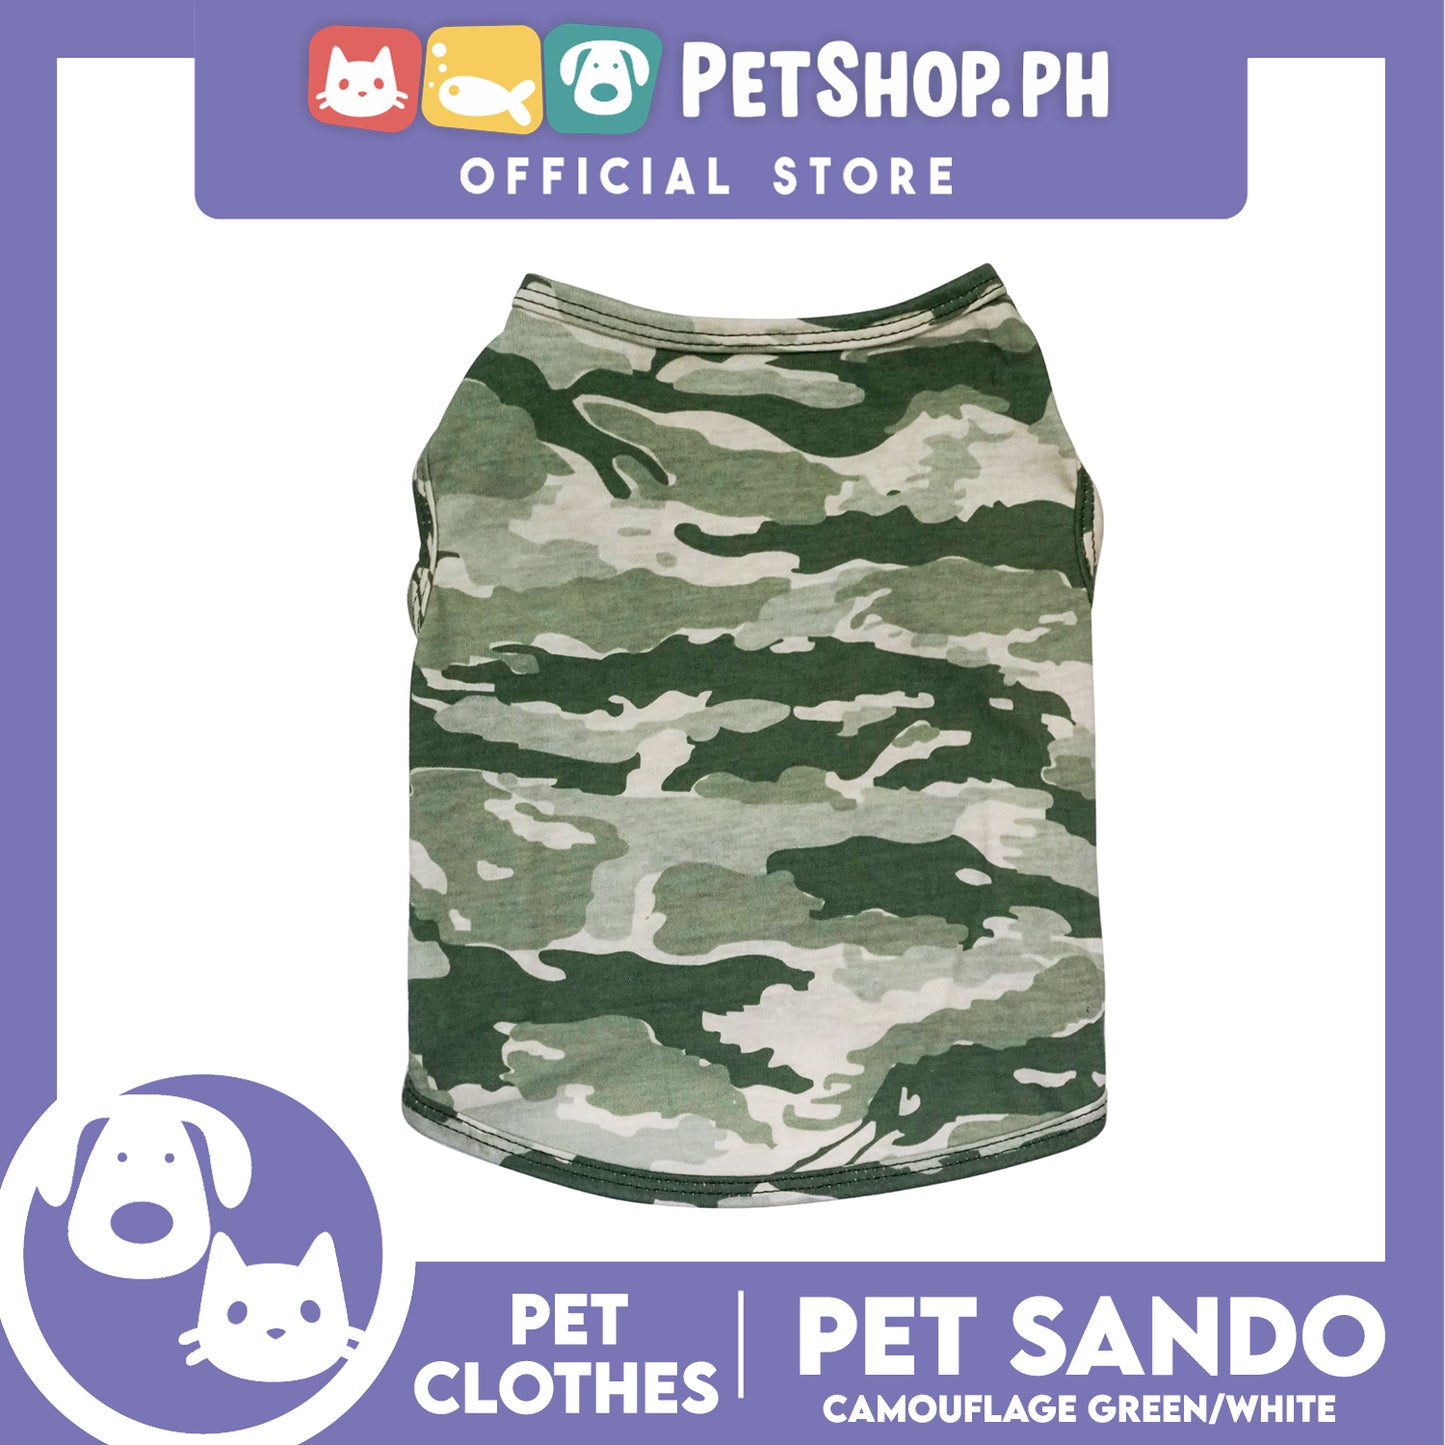 Pet Sando Camouflage Green/White (Large) Pet Shirt Clothes Dress Perfect fit for Dogs